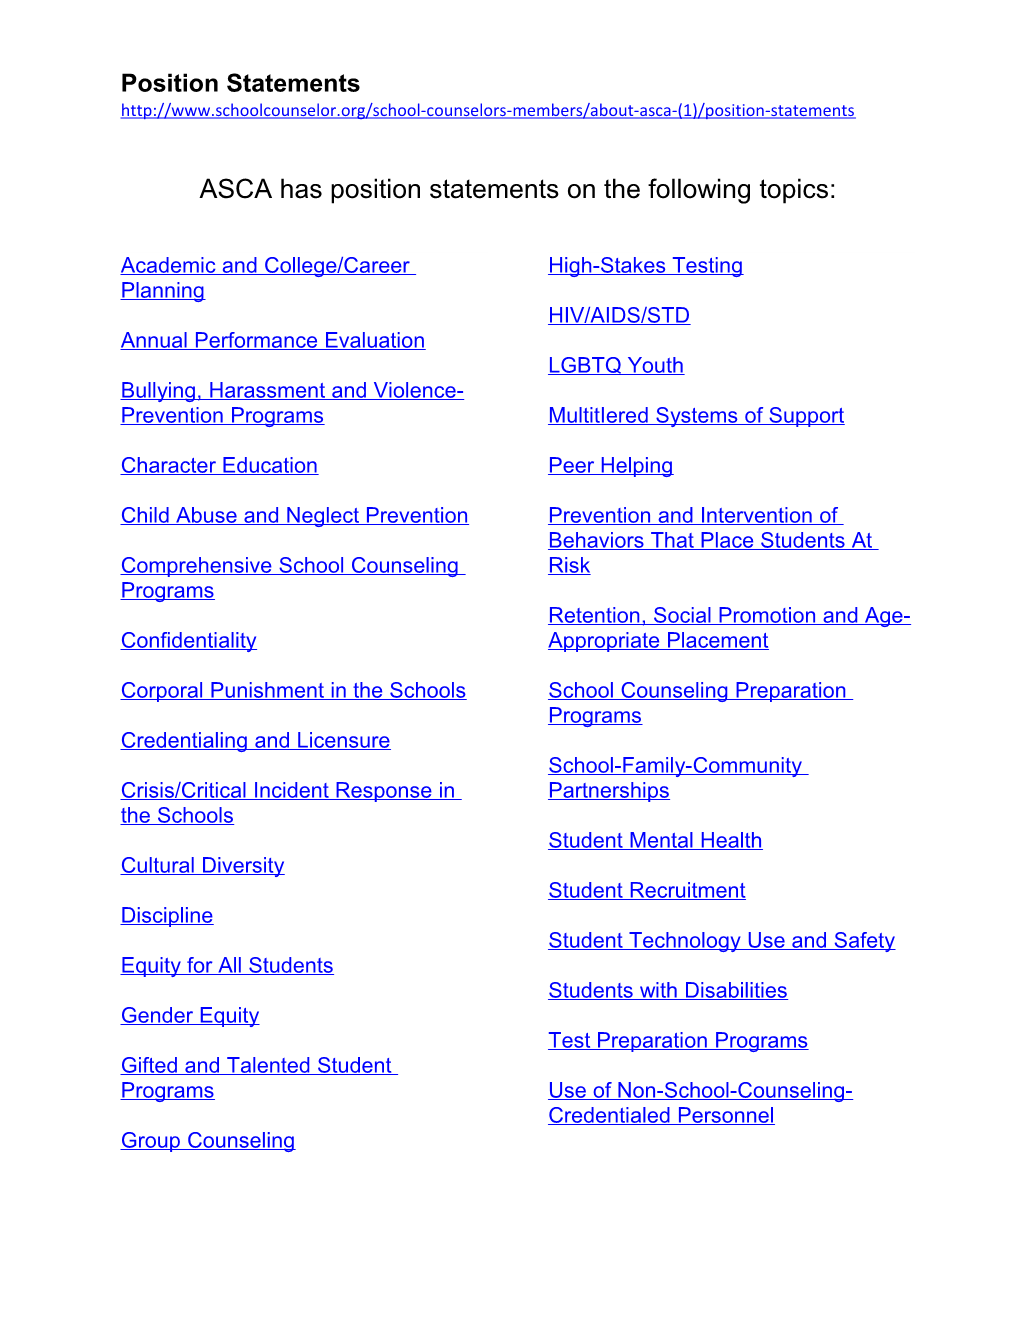 ASCA Has Position Statements on the Following Topics